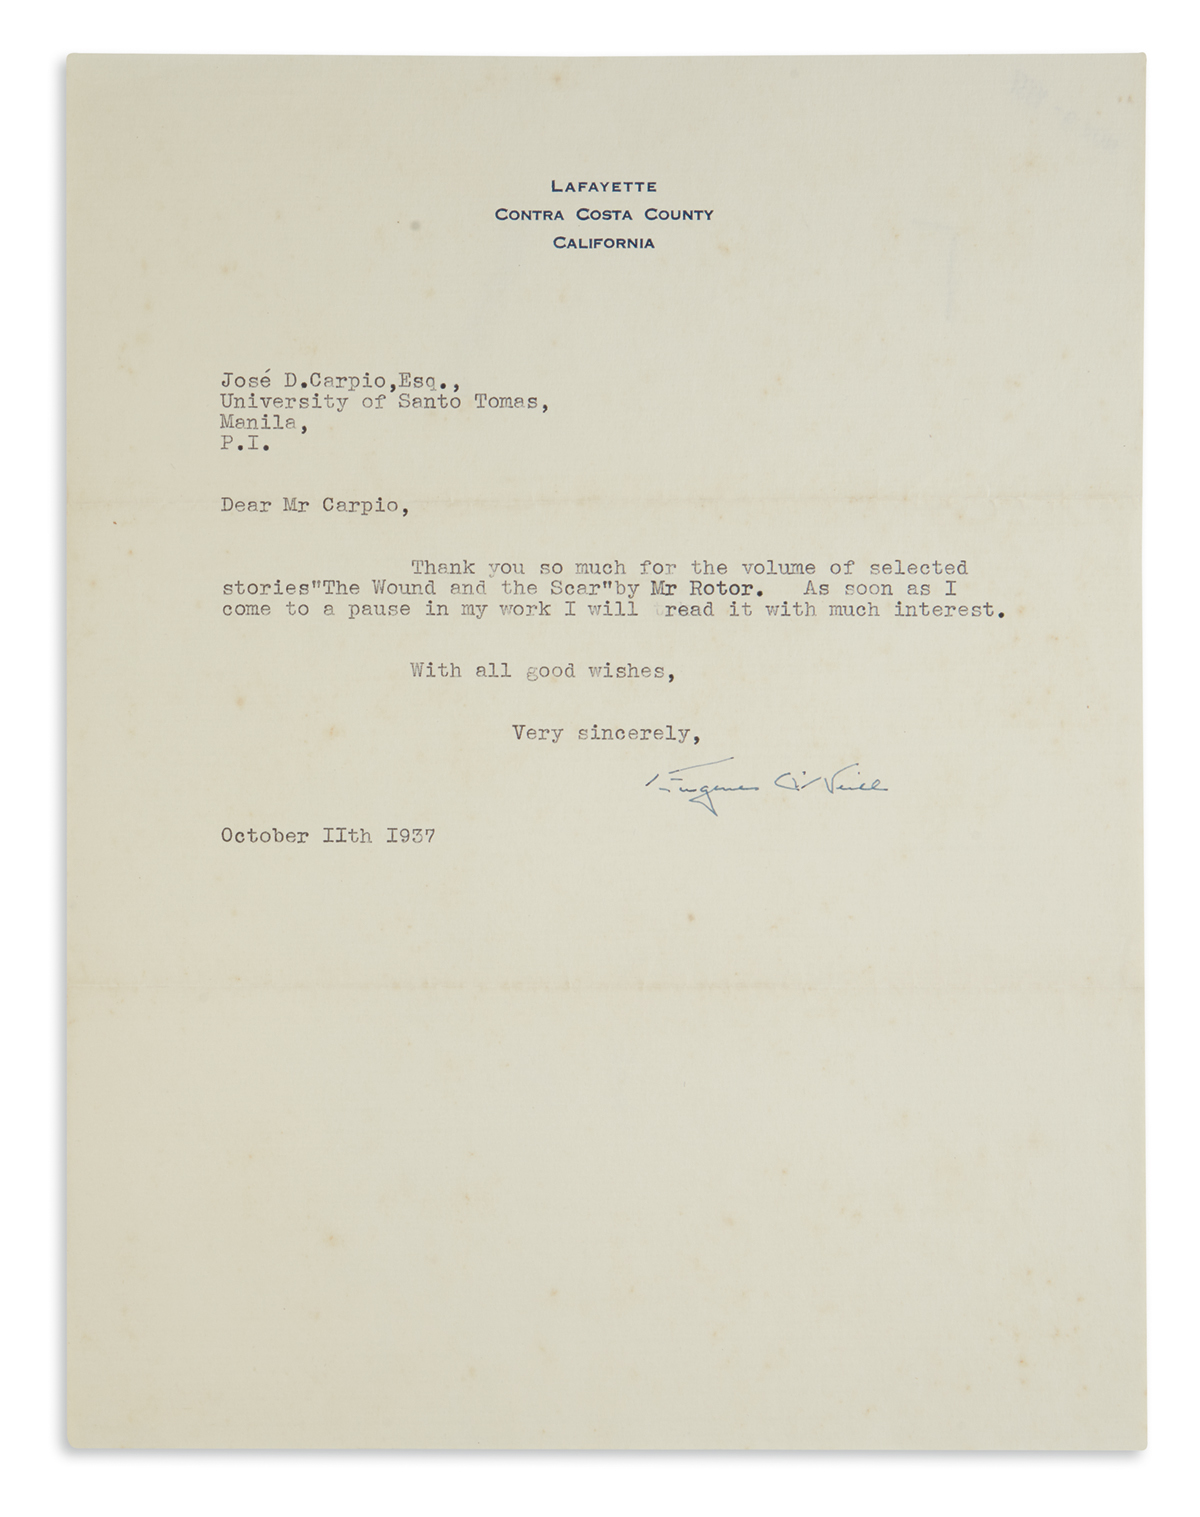 EUGENE ONEILL. Typed Letter Signed, to José D. Carpio, thanking for sending a copy of The Wound and the Scar...